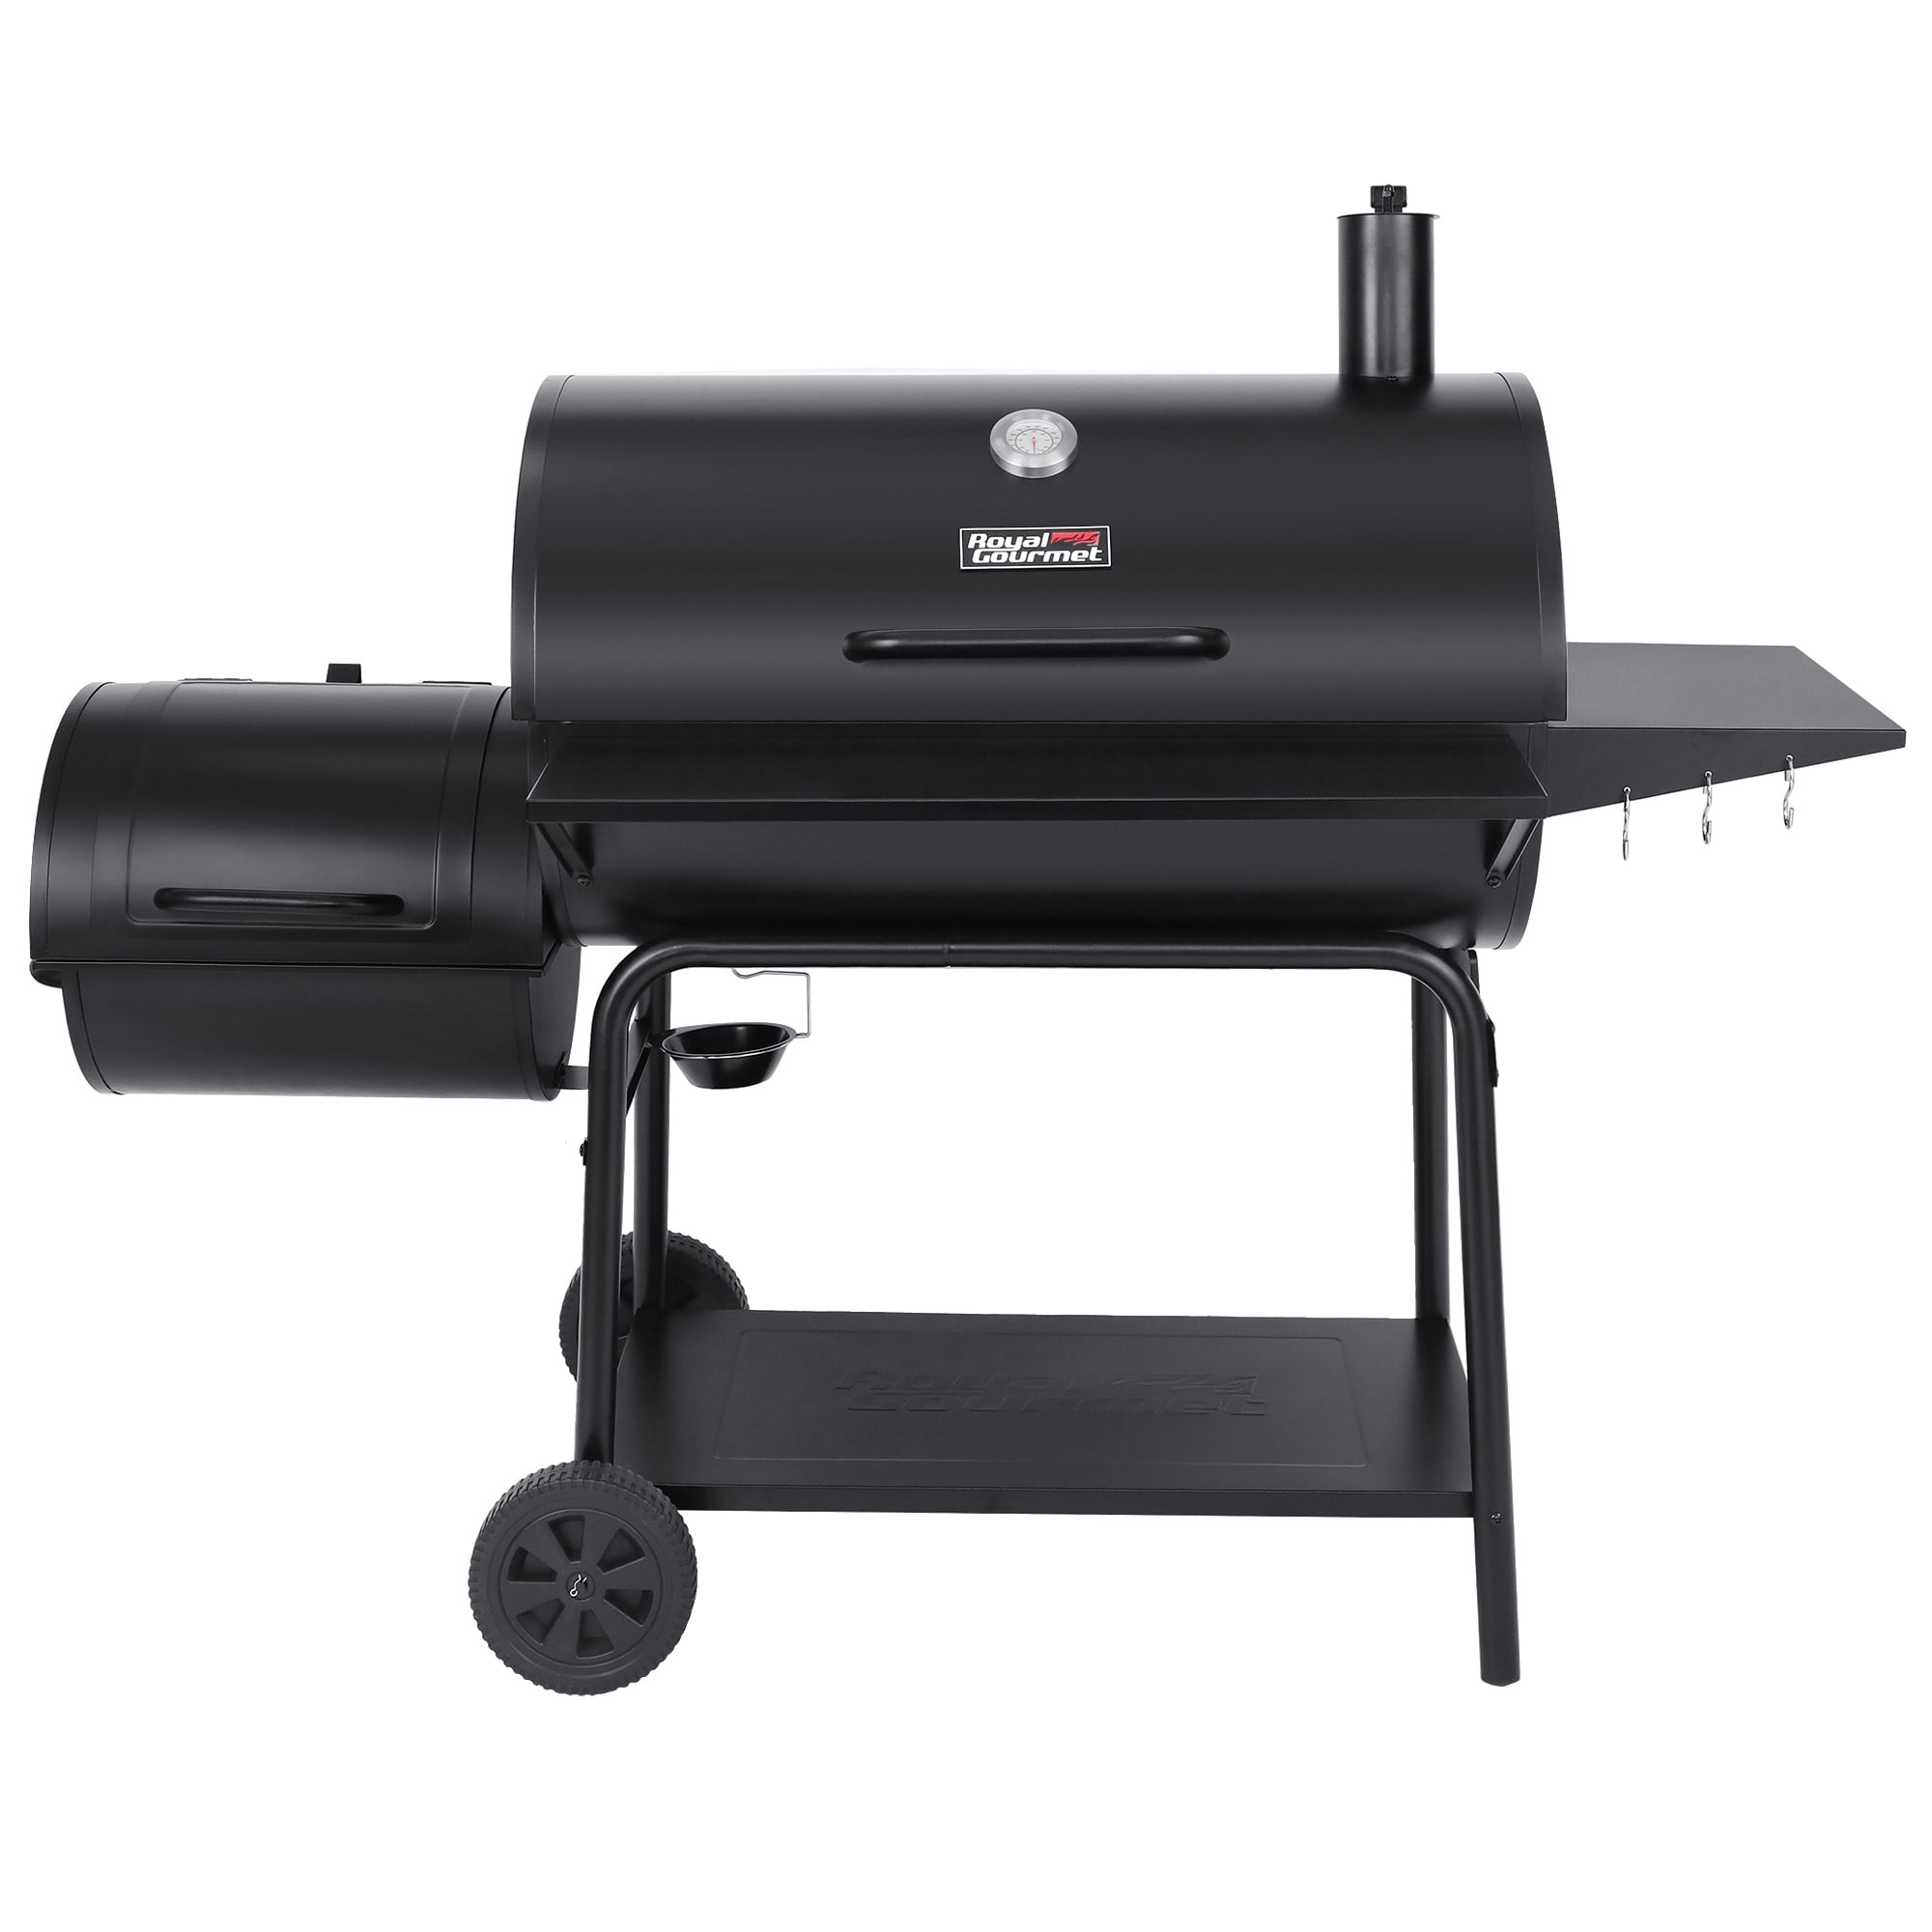 Royal Gourmet Cc1830sc Charcoal Grill Offset Smoker With Cover 810 Black for sale online 